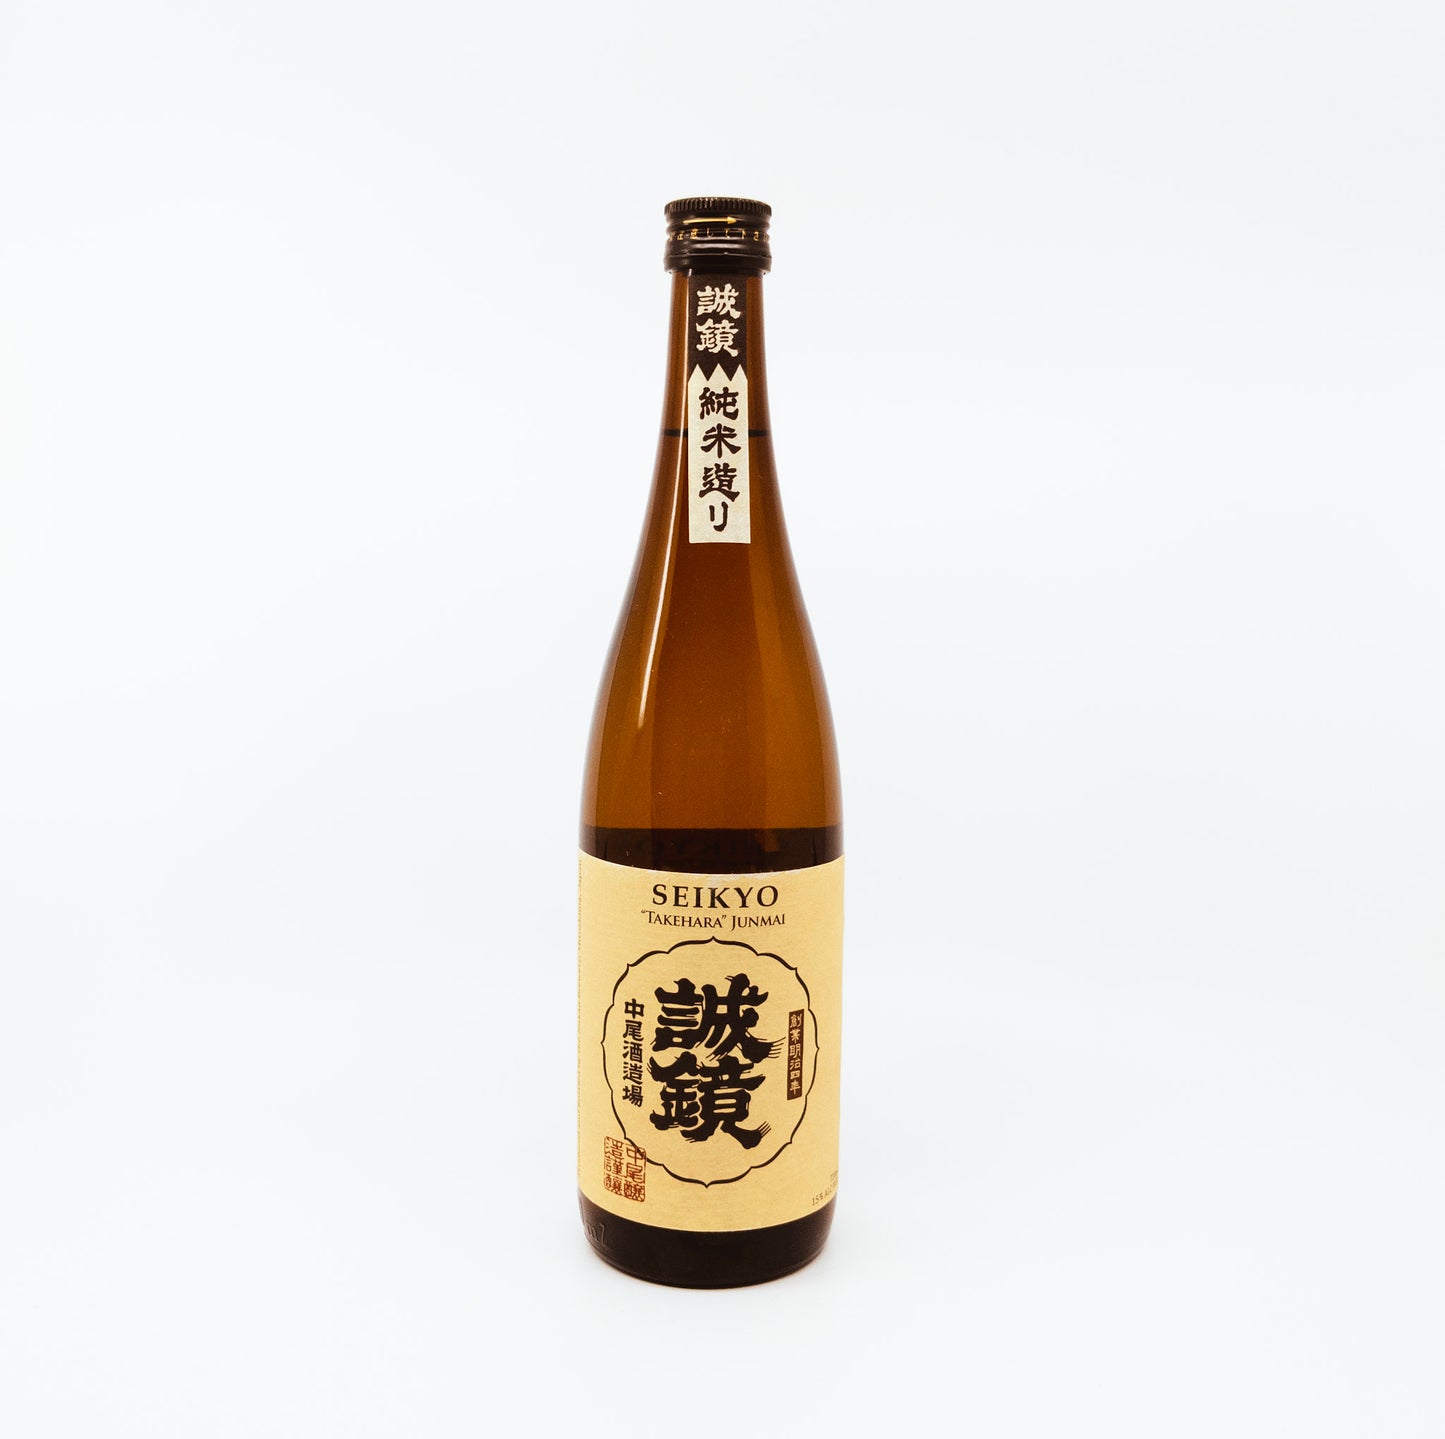 brown bottle of seikyo with cream label